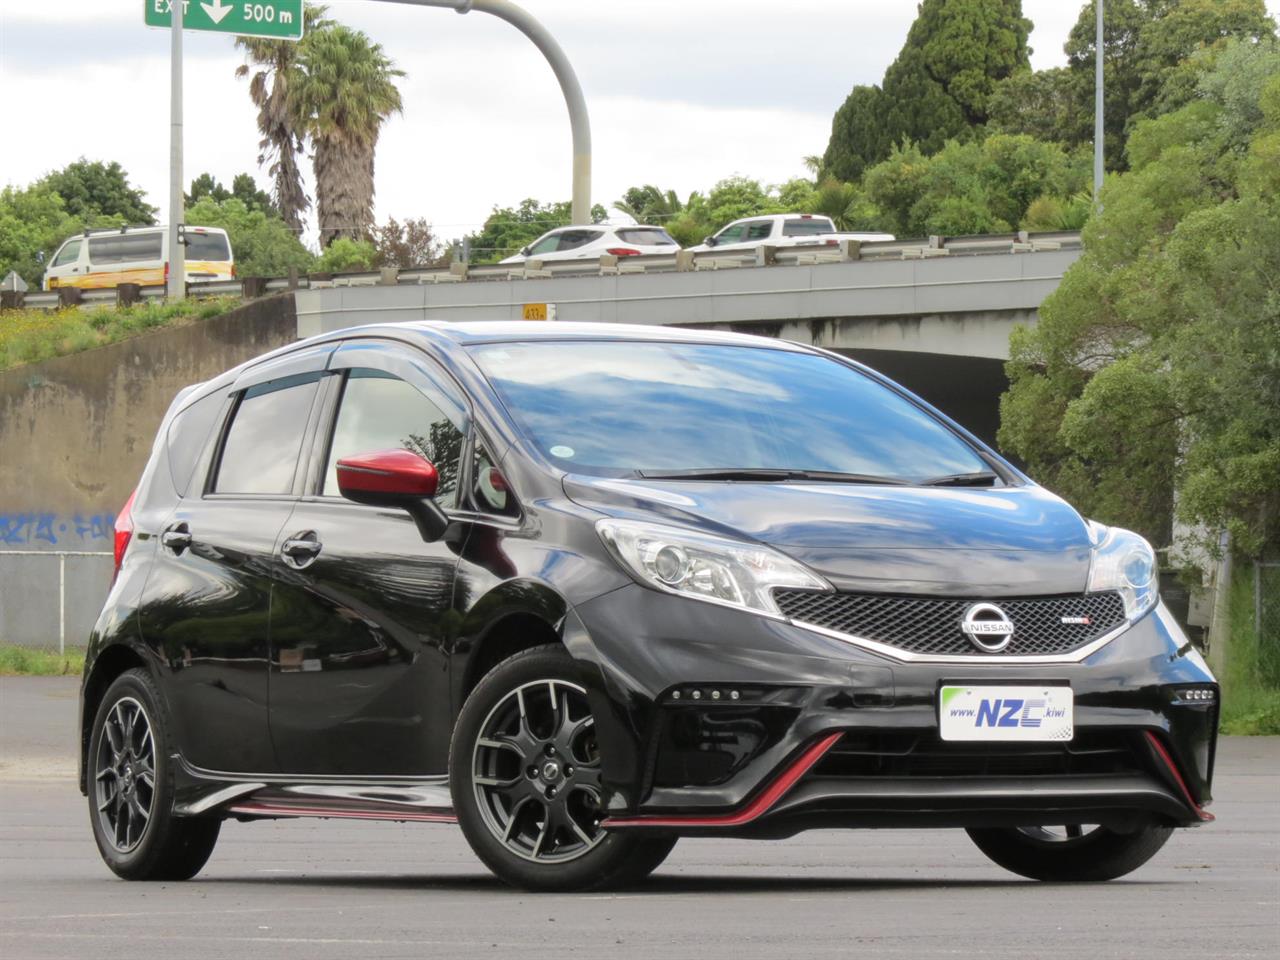 NZC best hot price for 2014 Nissan NOTE in Auckland